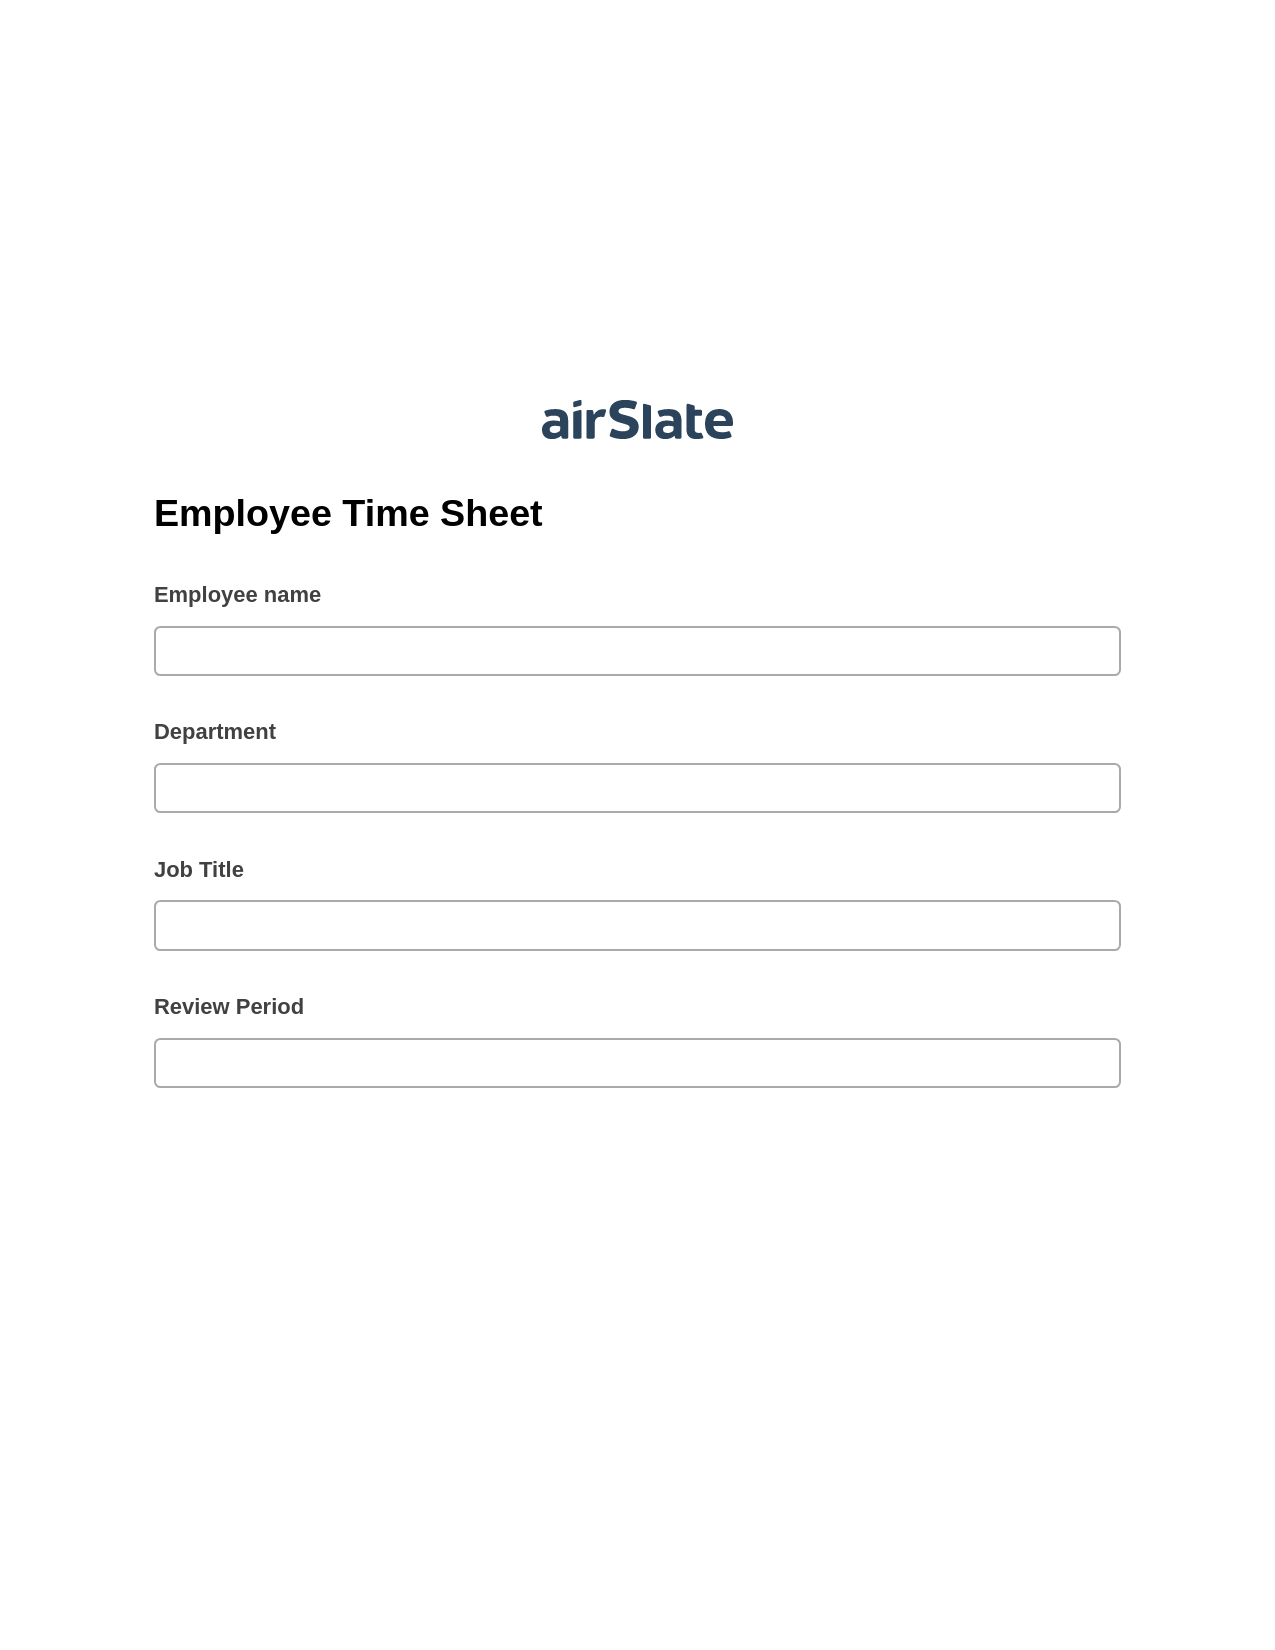 Employee Time Sheet Pre-fill from MS Dynamics 365 Records, SendGrid send Campaign bot, Export to Google Sheet Bot